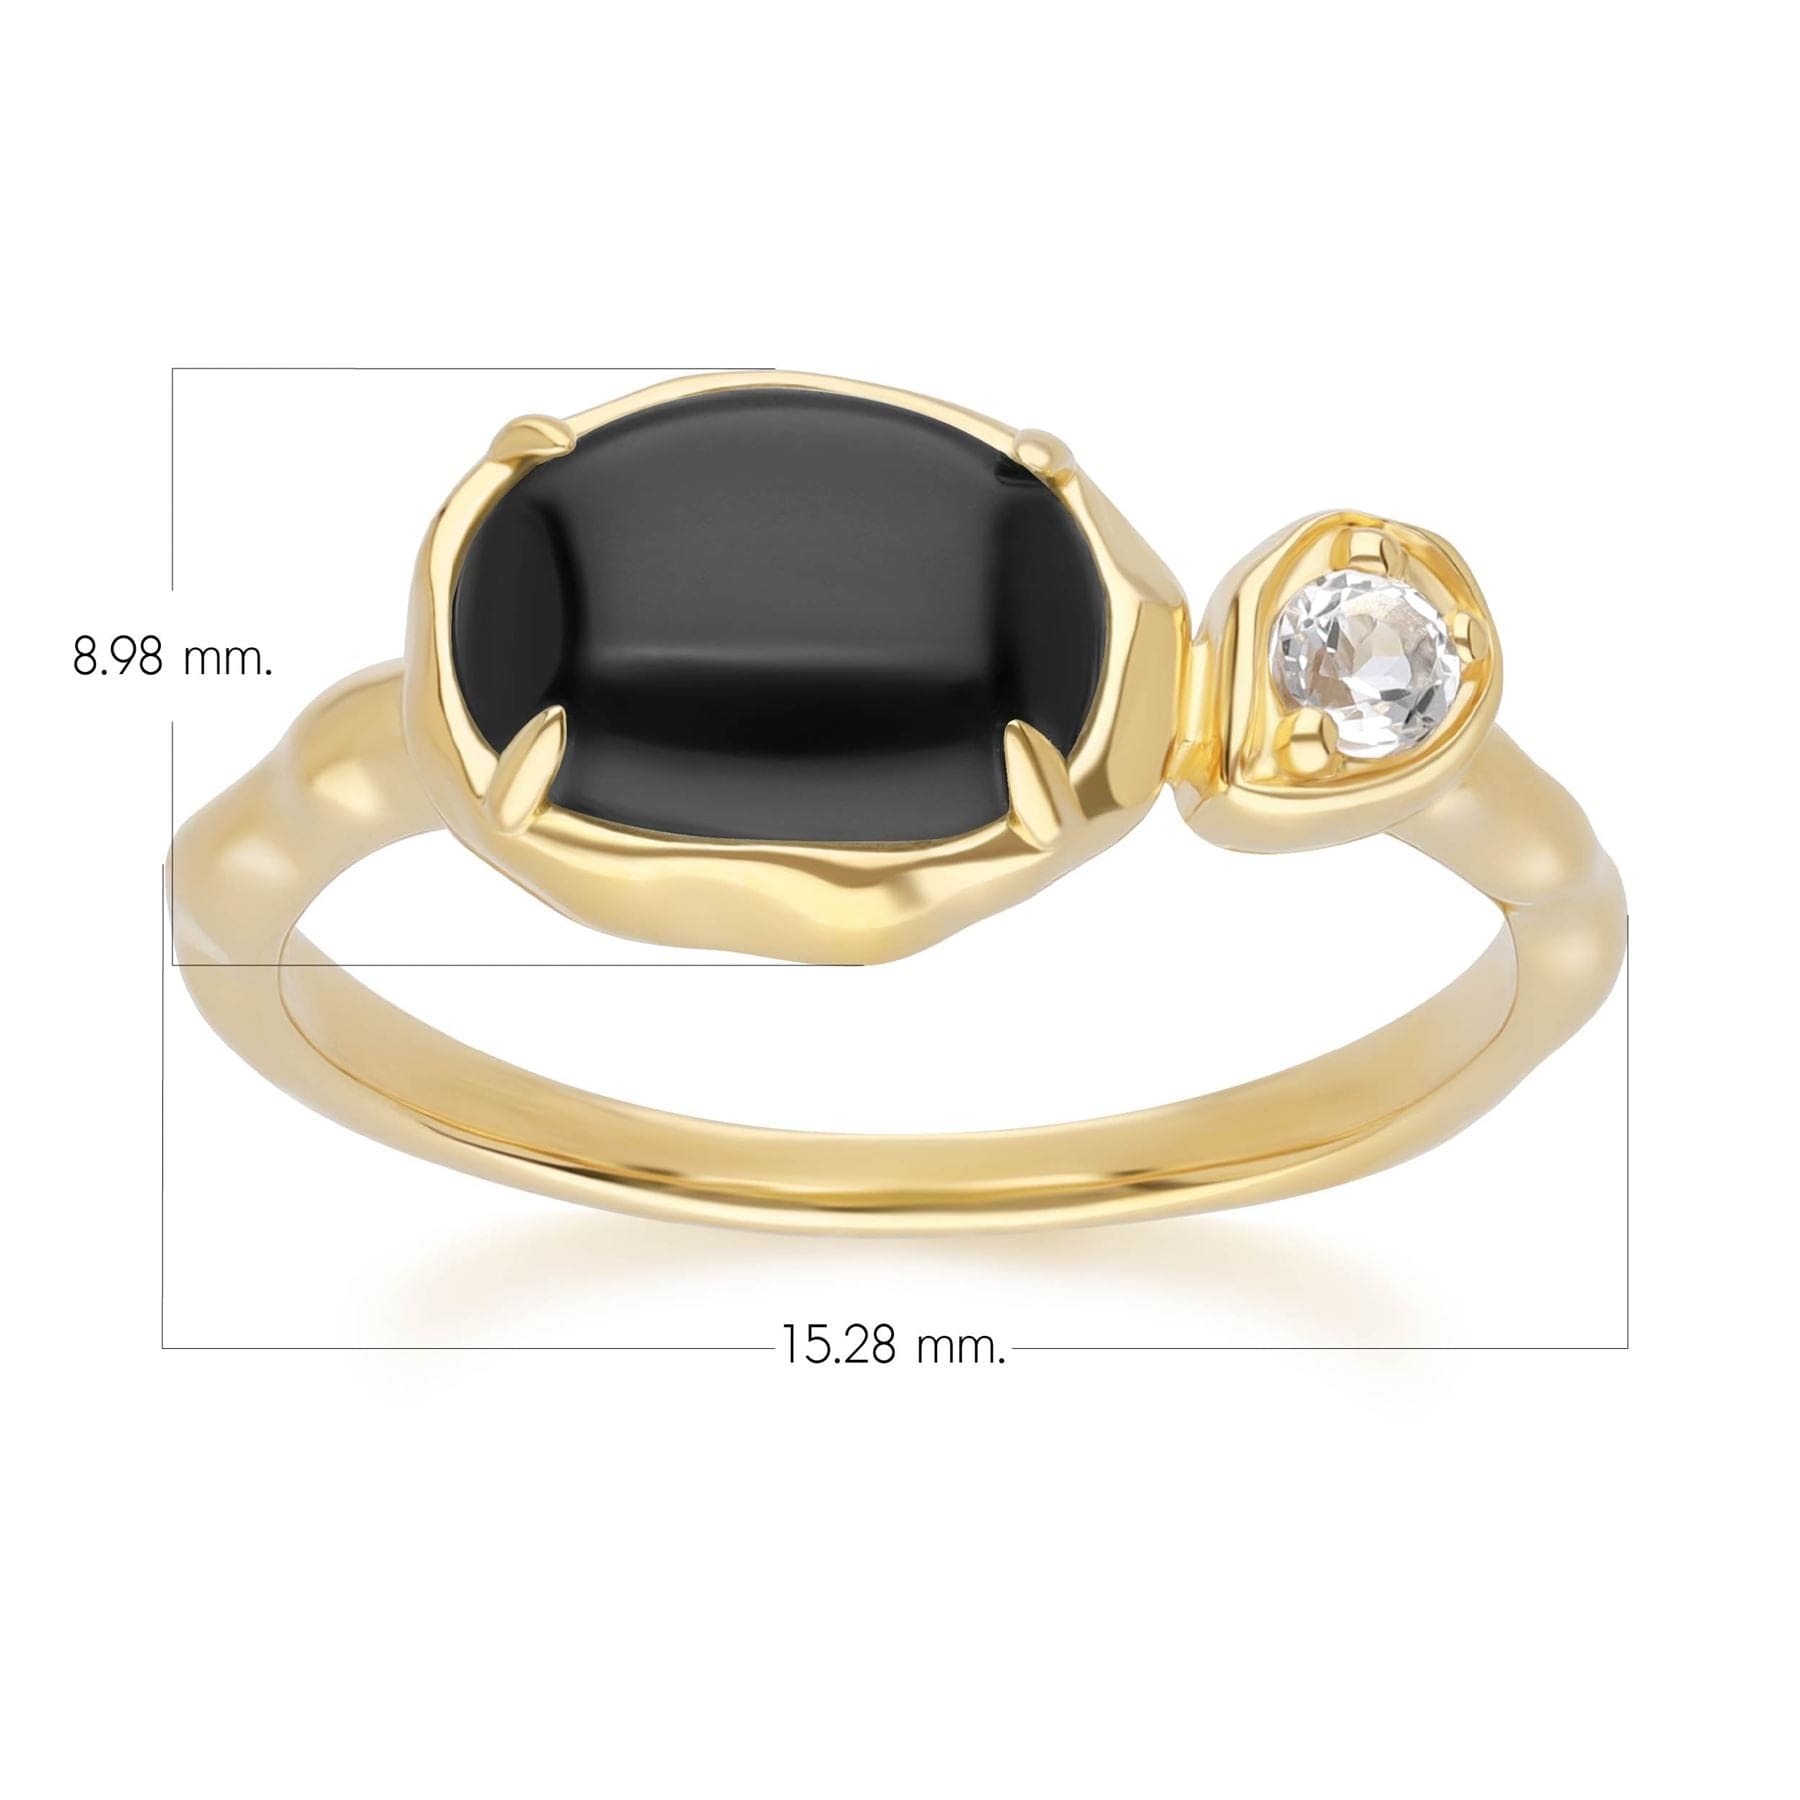 253R710303925 Irregular Oval Black Onyx & White Topaz Ring In 18ct Gold Plated SterlIng Silver Dimensions